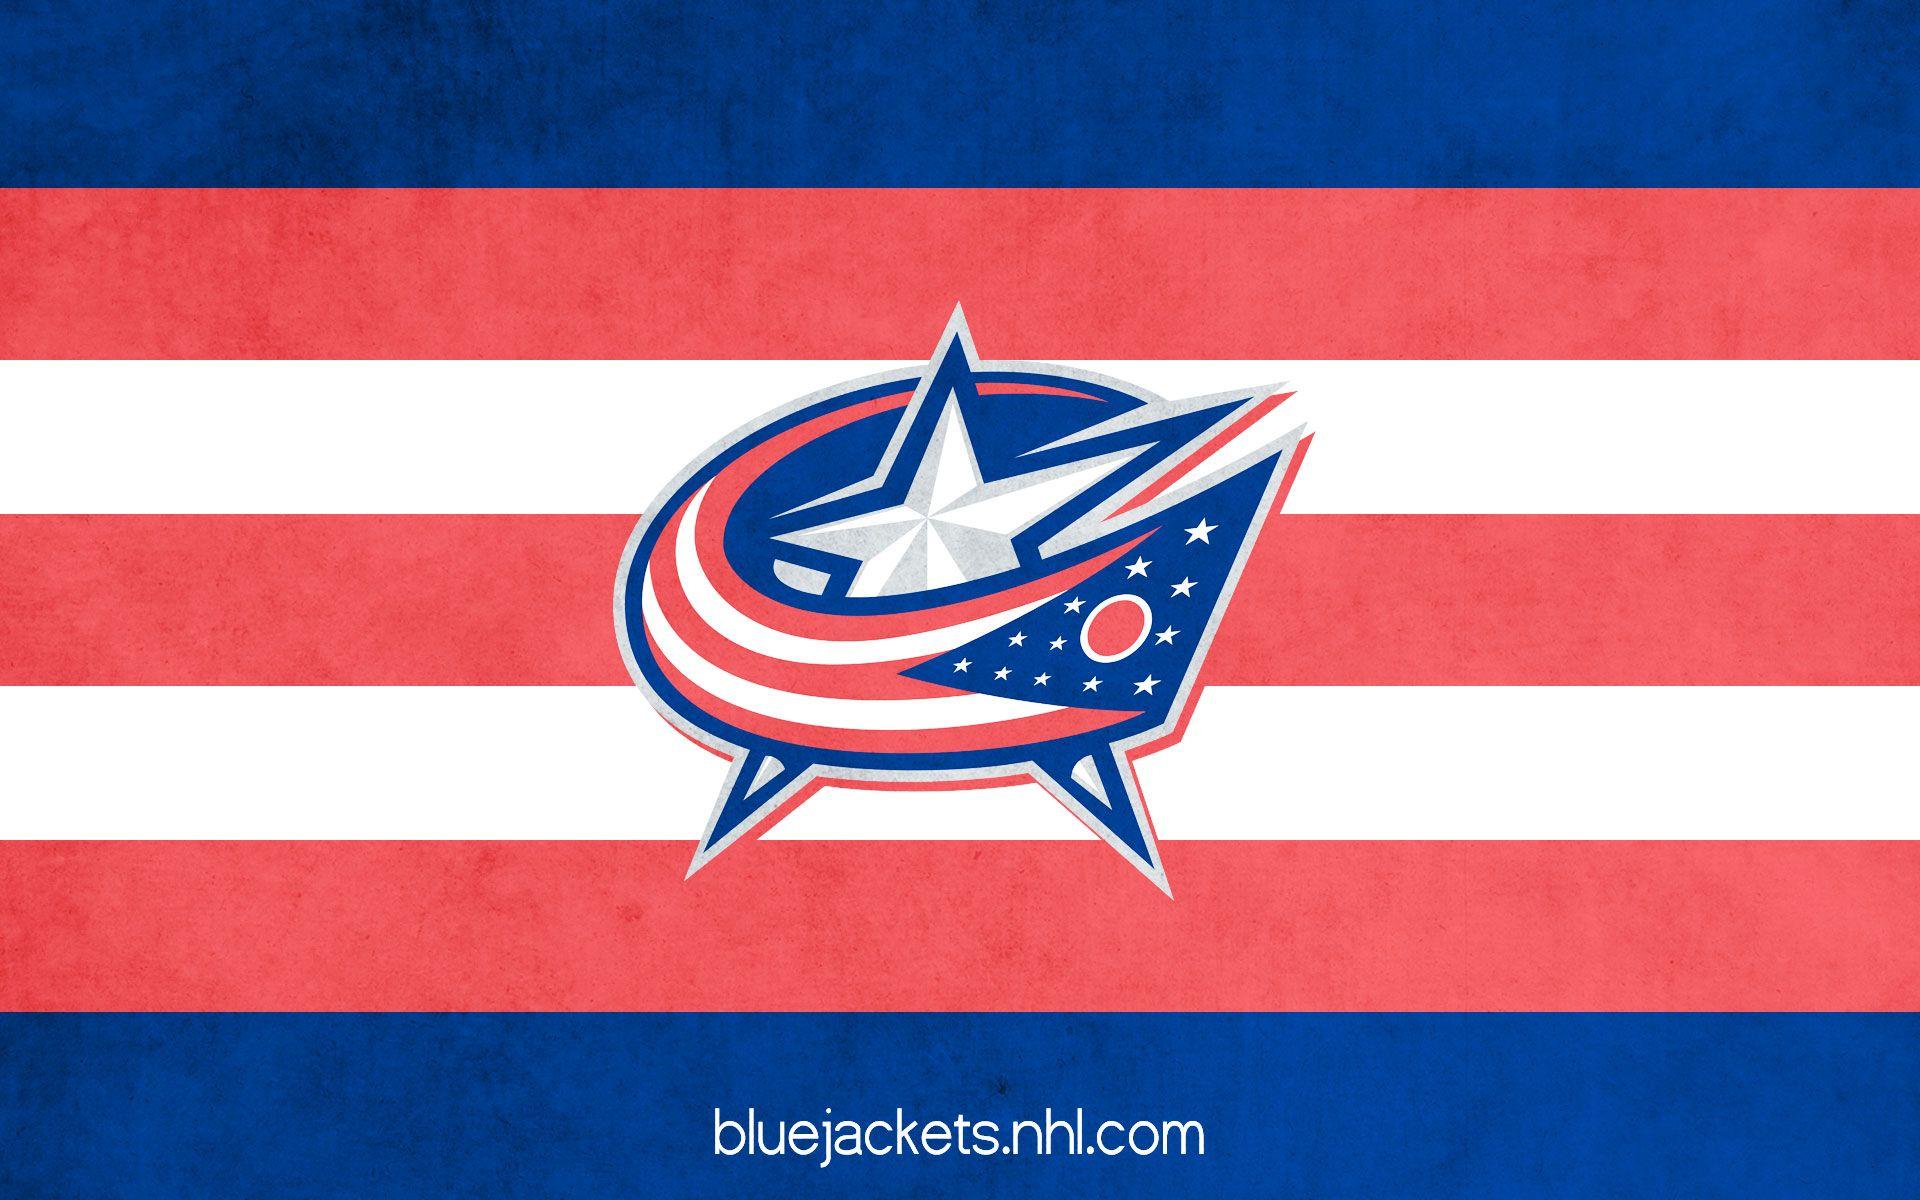 Columbus Blue Jackets Wallpapers and Backgrounds